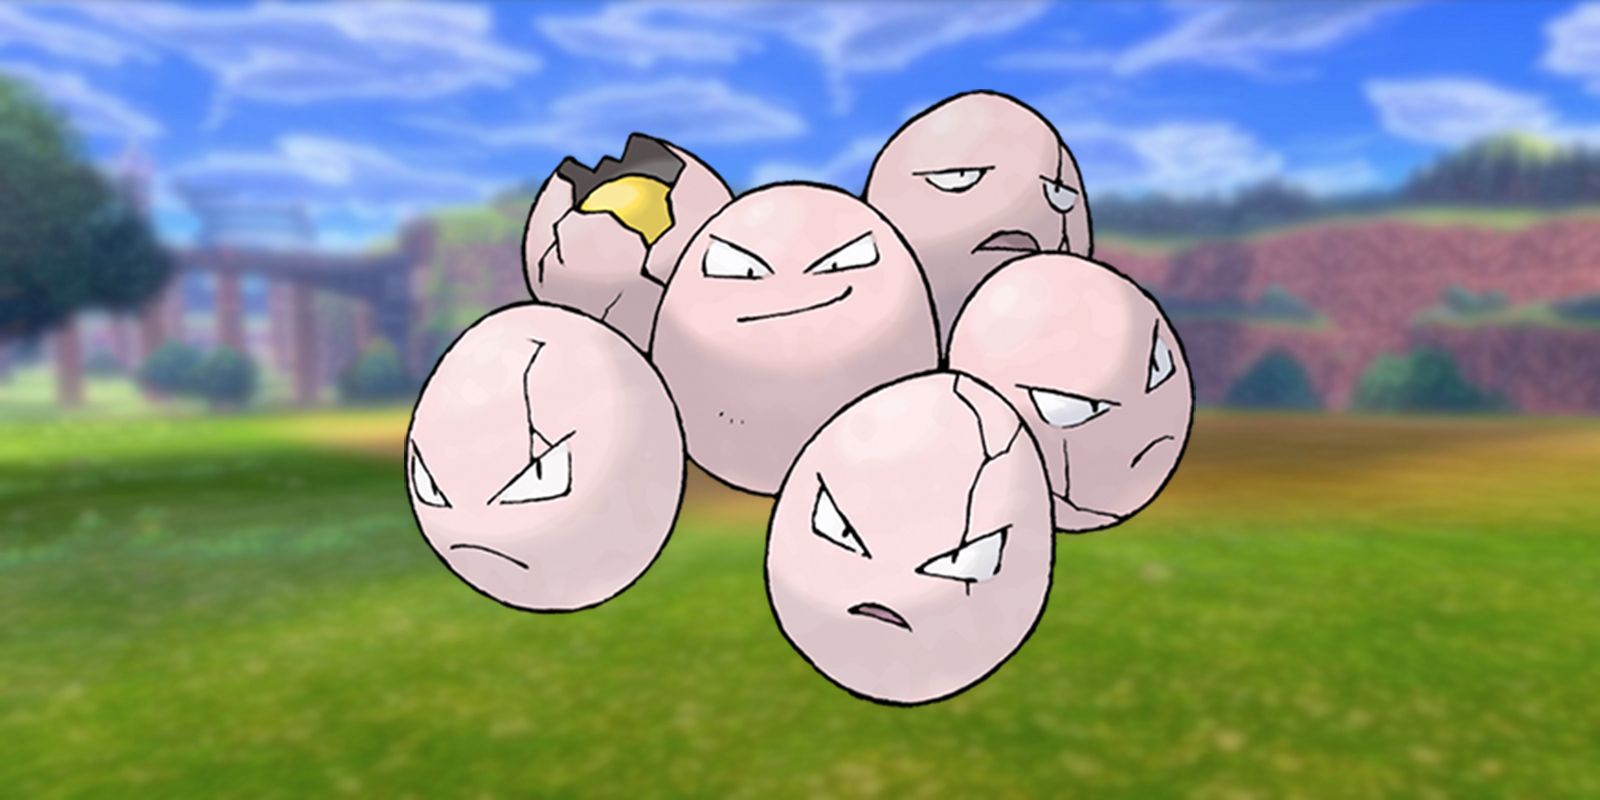 Exeggcute Pokémon in Sword and Shield's Wild Area